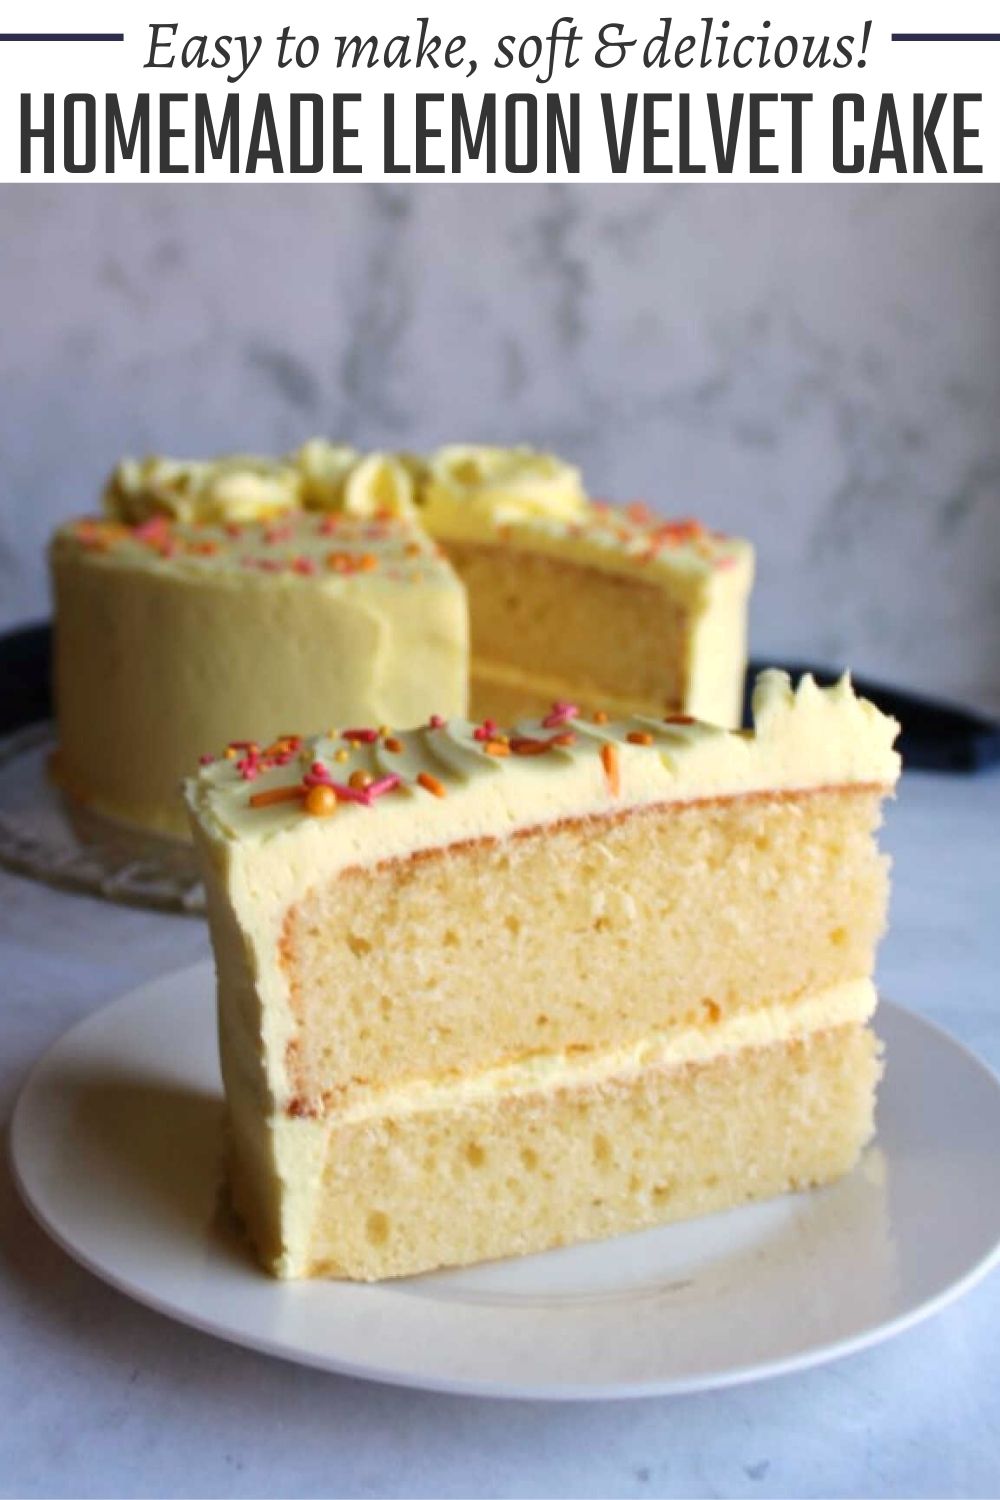 Layers of soft lemon cake wrapped in a luscious lemon frosting, this citrus twist on a velvet cake is a must make.  The recipe is super simple to make.  There's no butter to soften or crazy ingredients to get.  You'll have it in the oven in no time and you'll be thanking your lucky stars after the first bite!